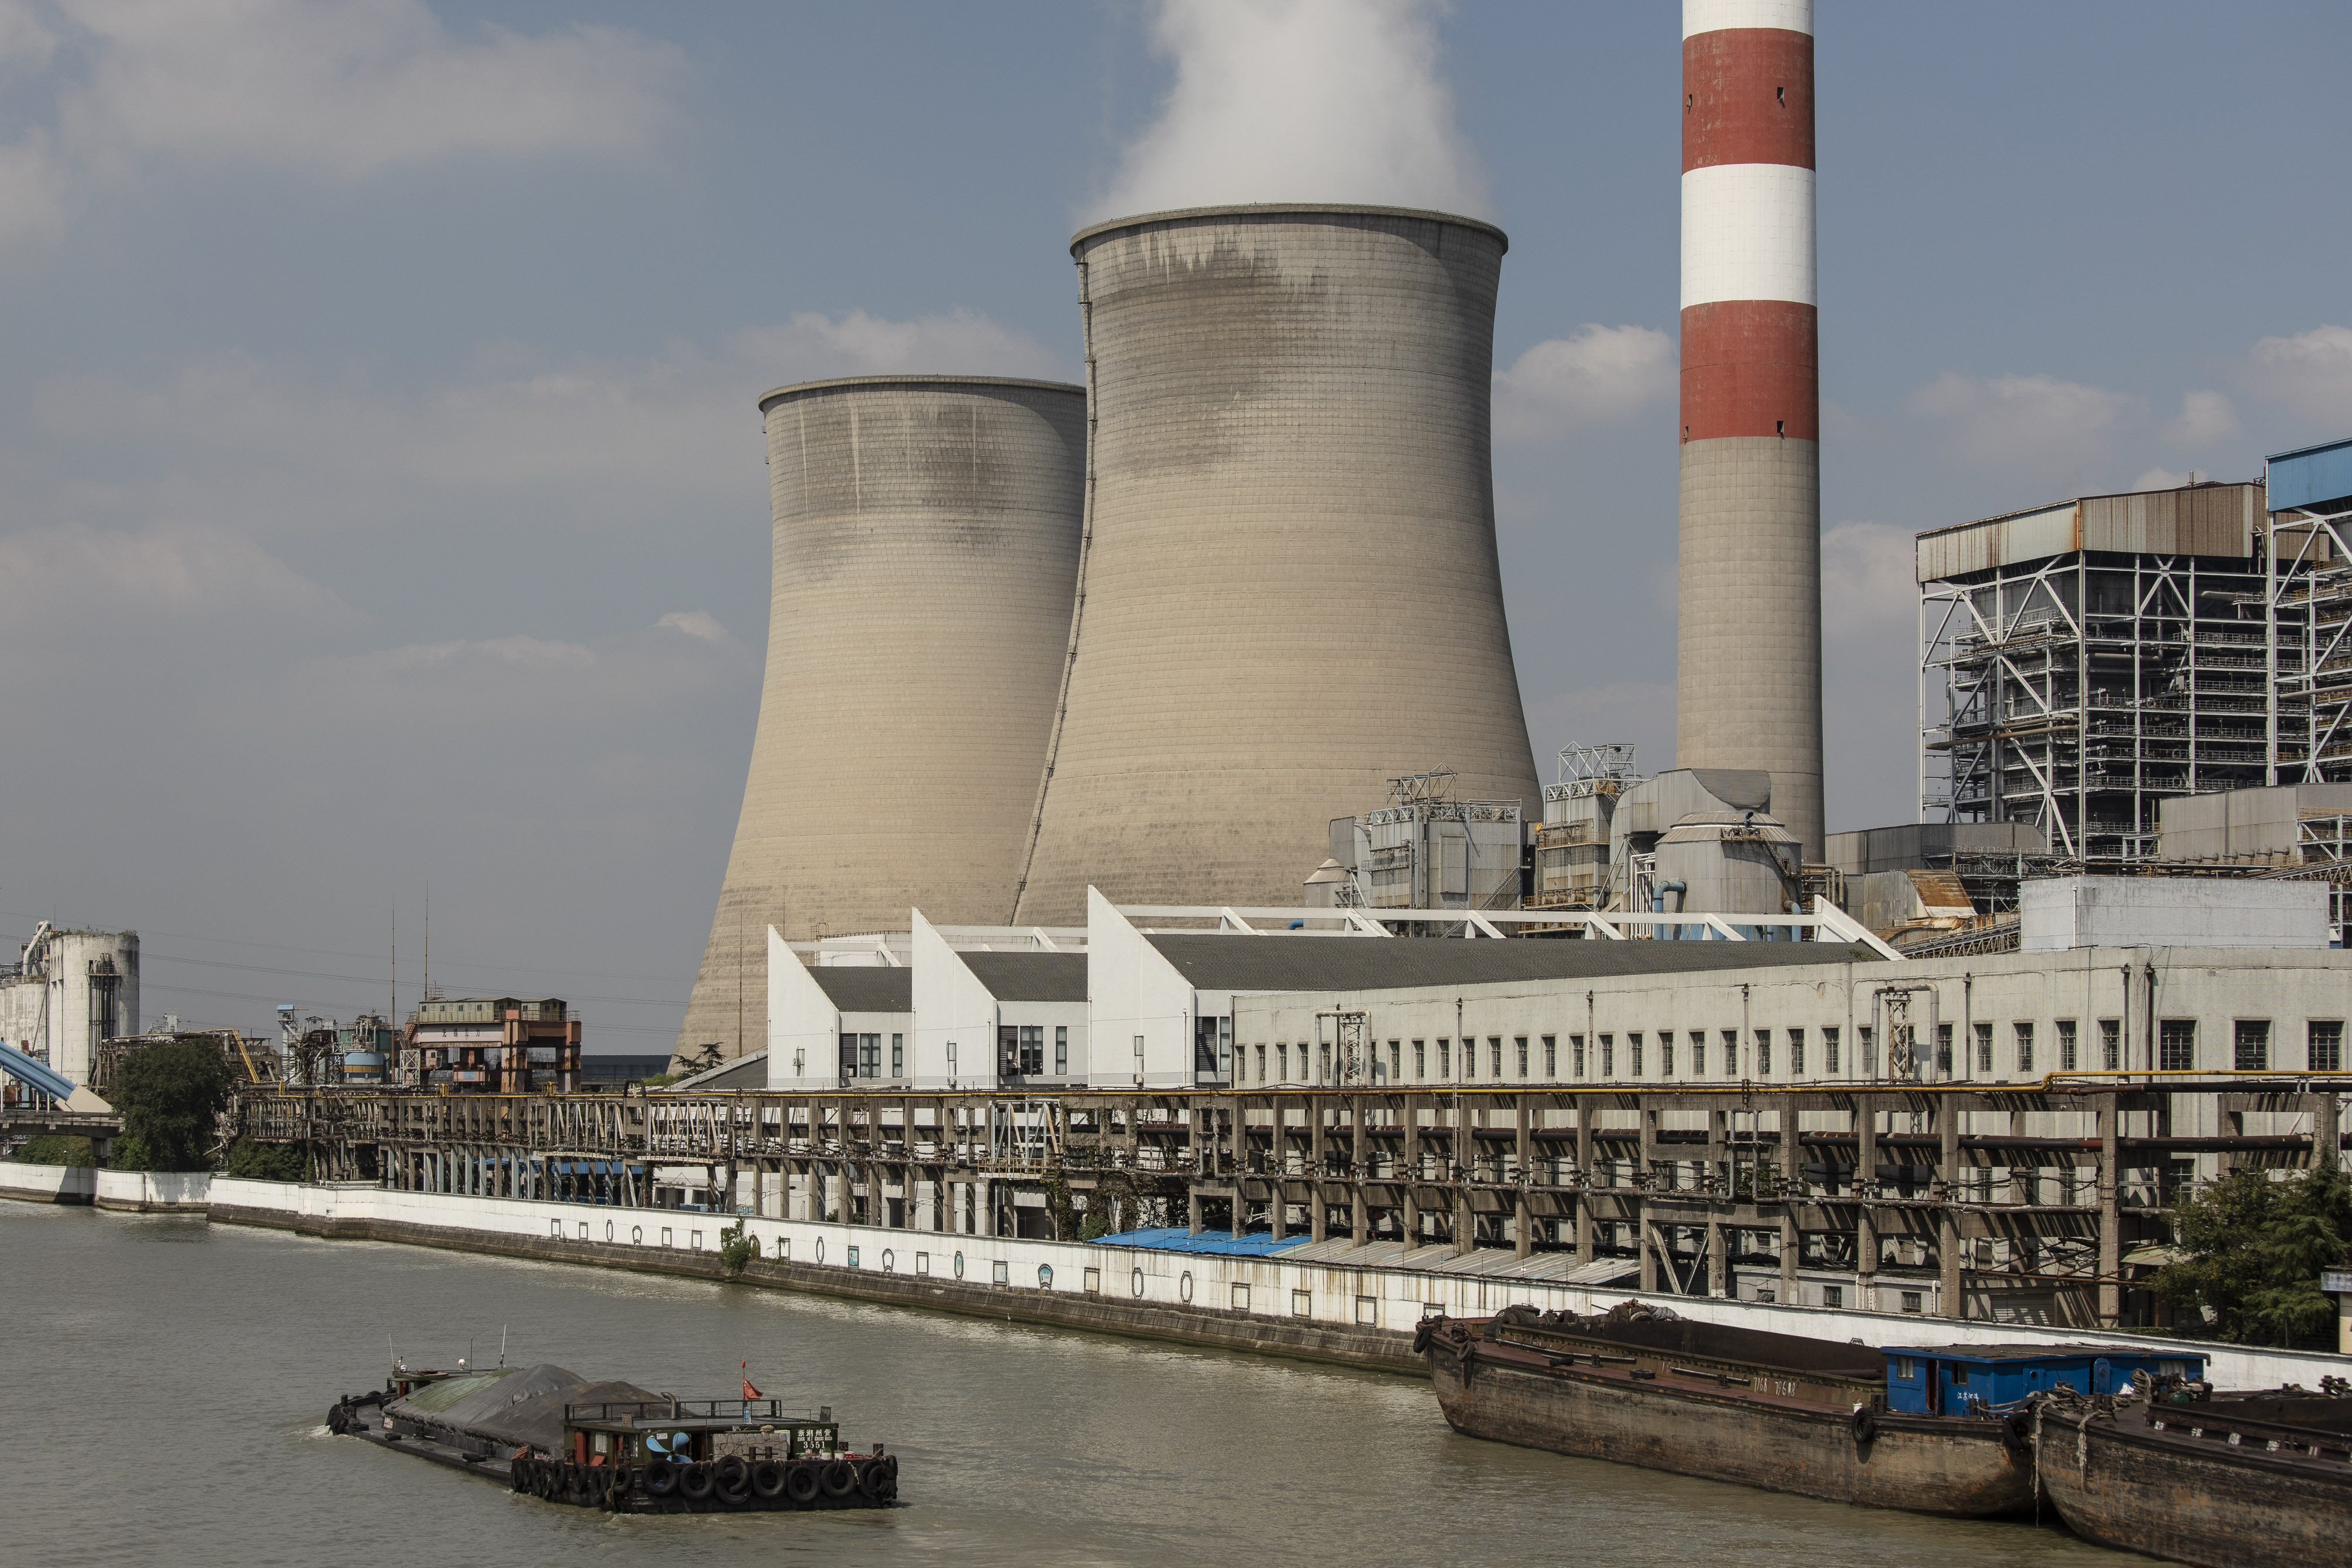 The Wangting Power Plant in Jiangsu province, China. Xi’s announcement was hailed as a significant step amid increasing climate concerns. Photo: Bloomberg